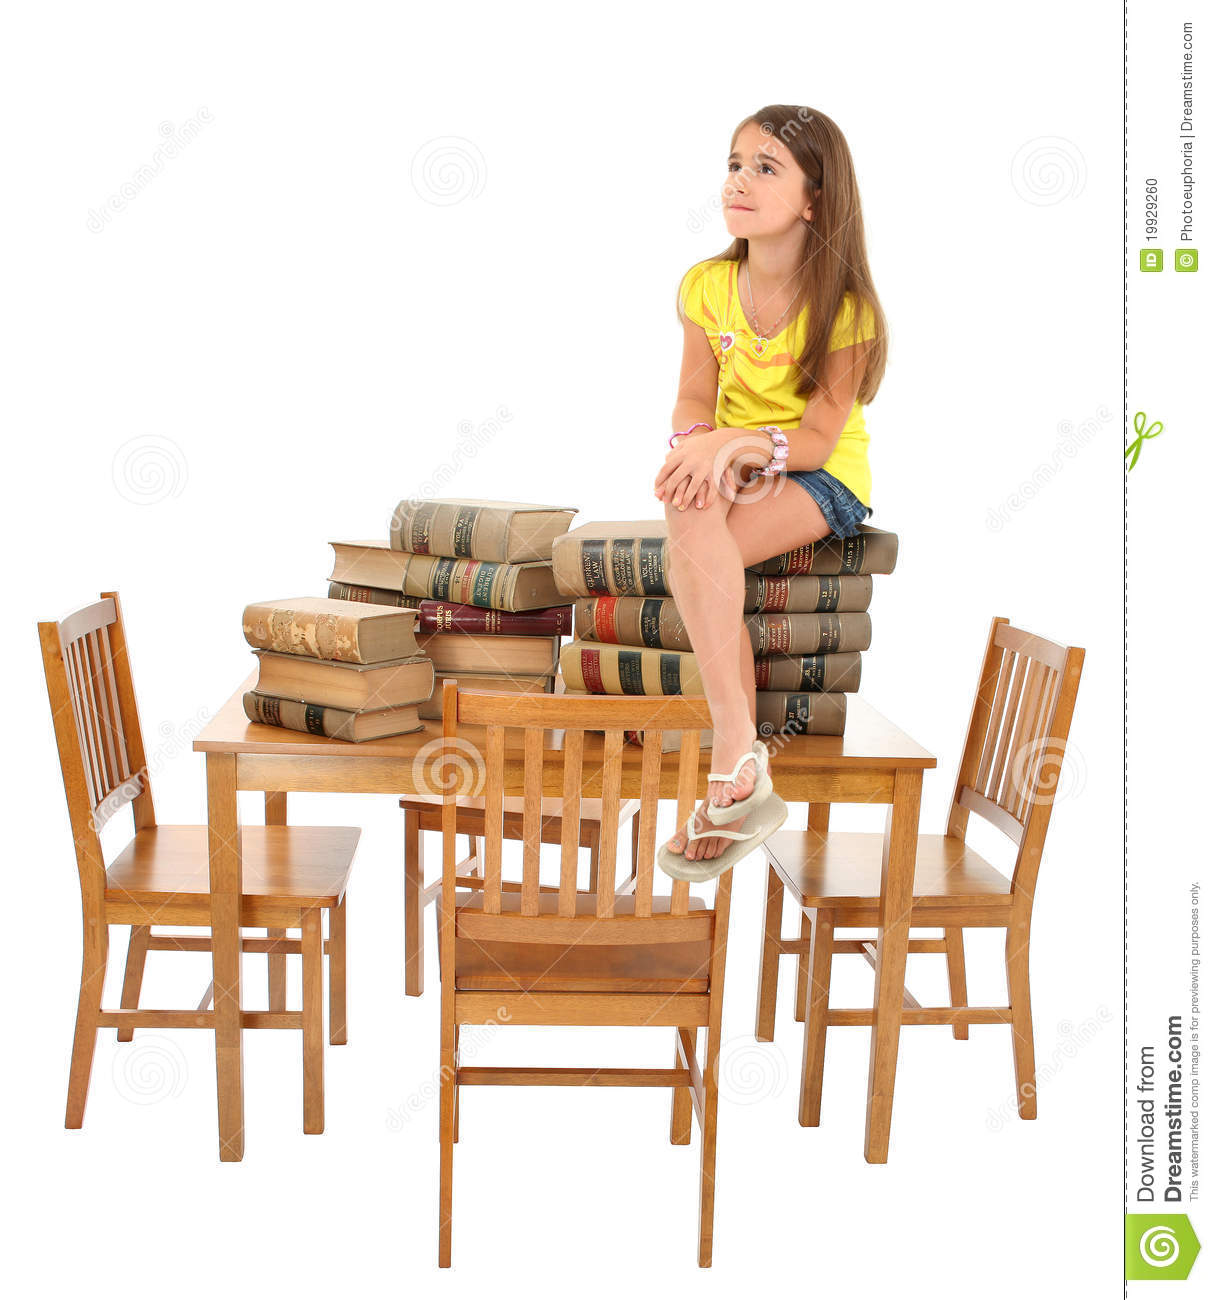 Young Student Sitting On Stack Of Books On Table Over White